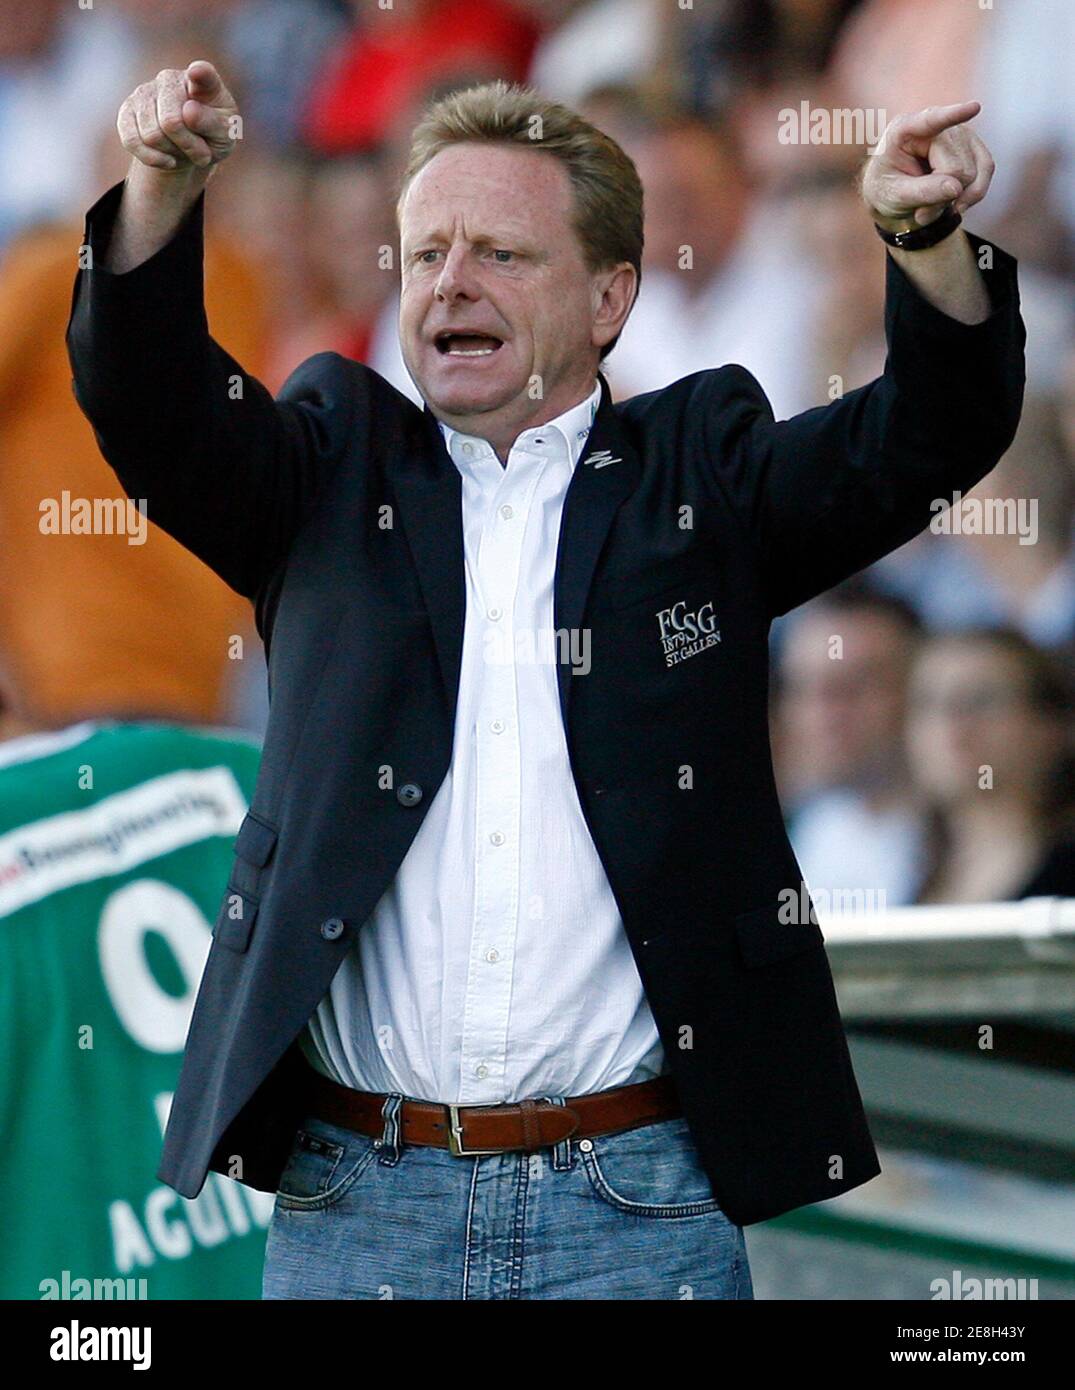 FC St. Gallen coach Rolf Fringer reacts during their Super League soccer match against FC Sion in St. Gallen August 26, 2007. REUTERS/Miro Kuzmanovic (SWITZERLAND) Stock Photo